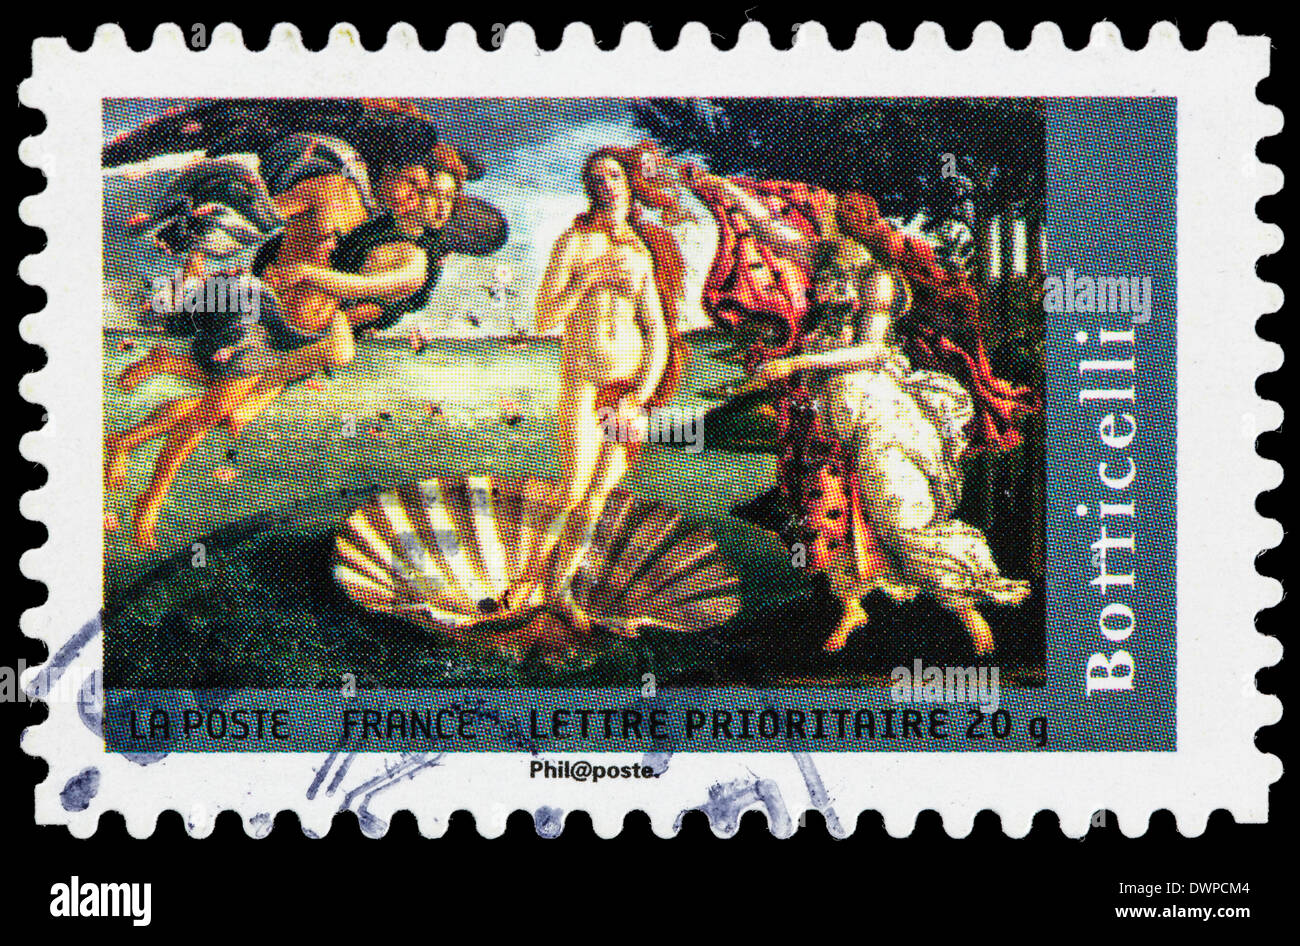 France postages stamp with an illustration of the painting The Birth of Venus by Sandro Botticelli. Stock Photo